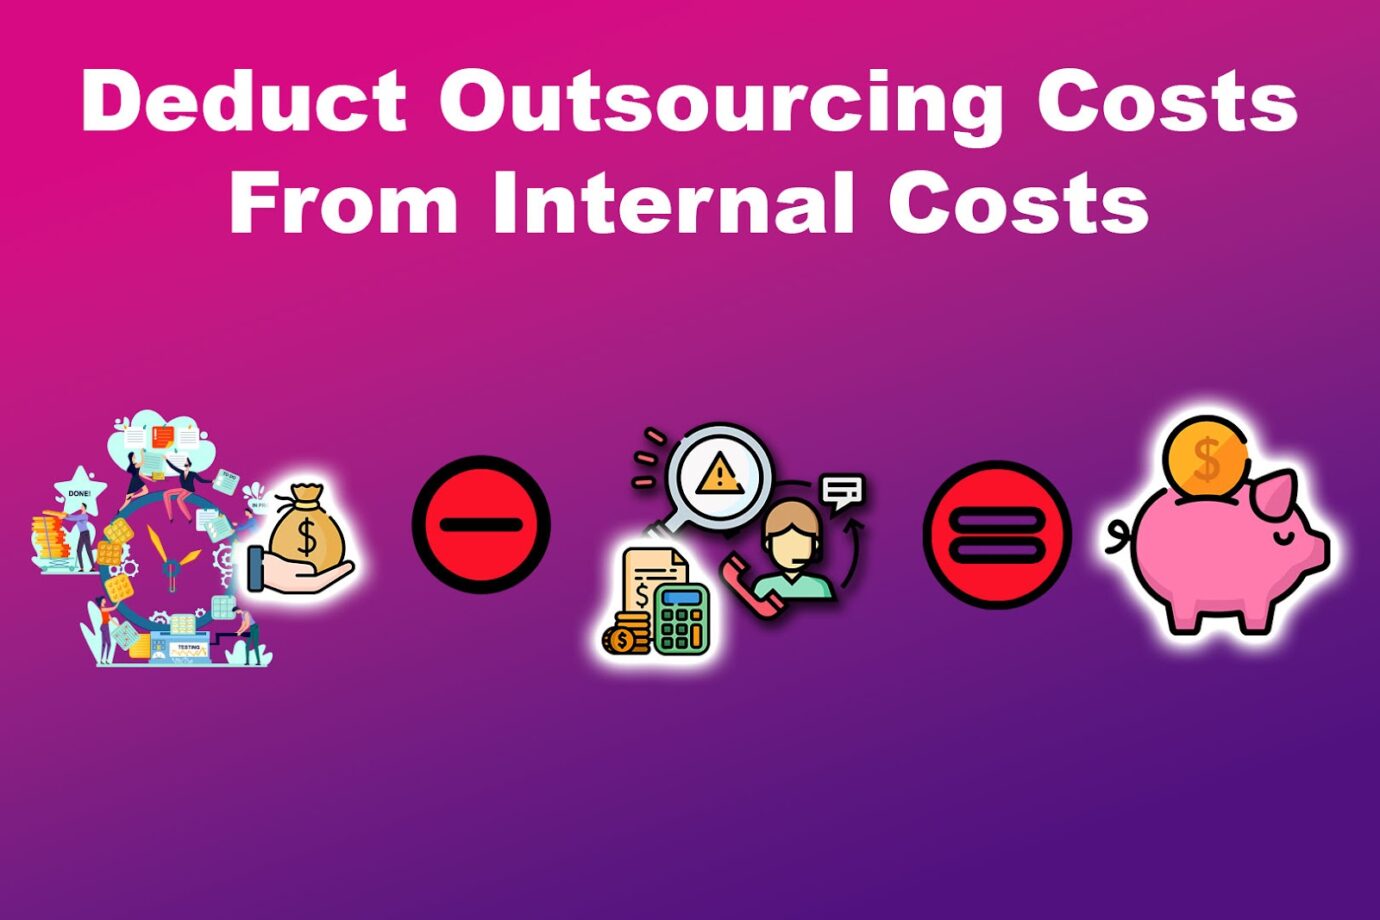 Deduct Outsourcing Costs From Internal Costs